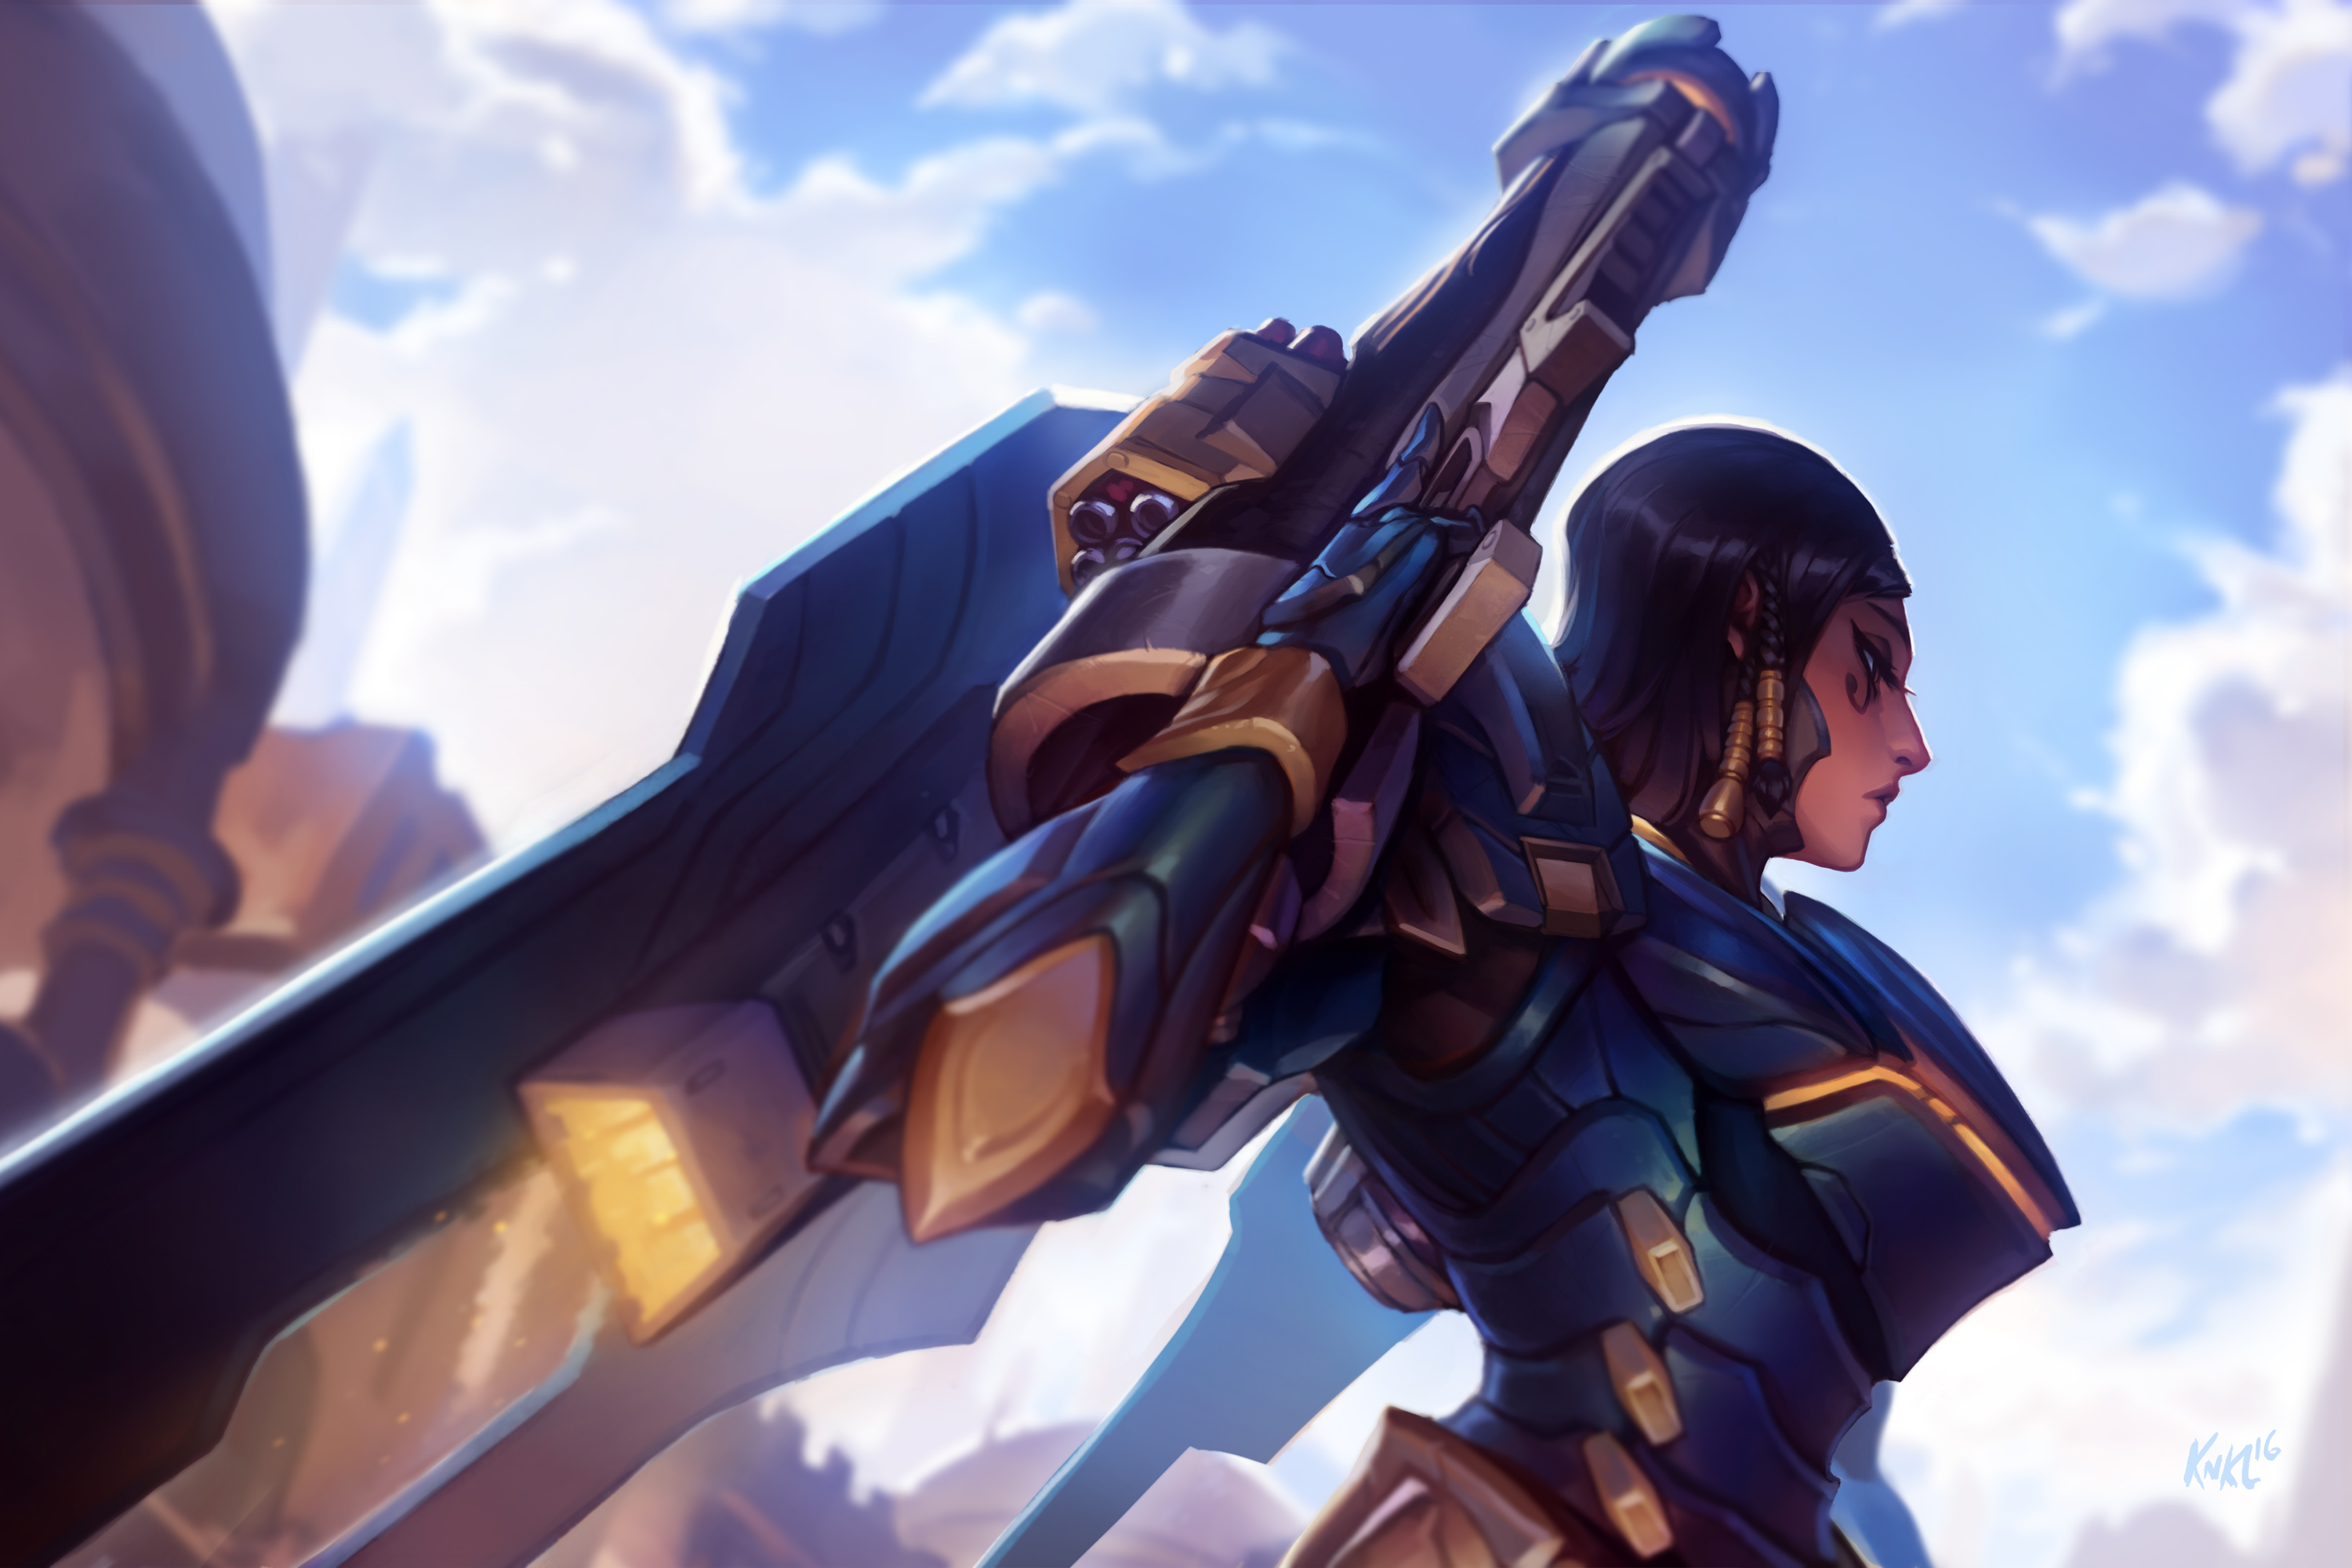 pharah___21_days_of_overwatch__by_knkl-d